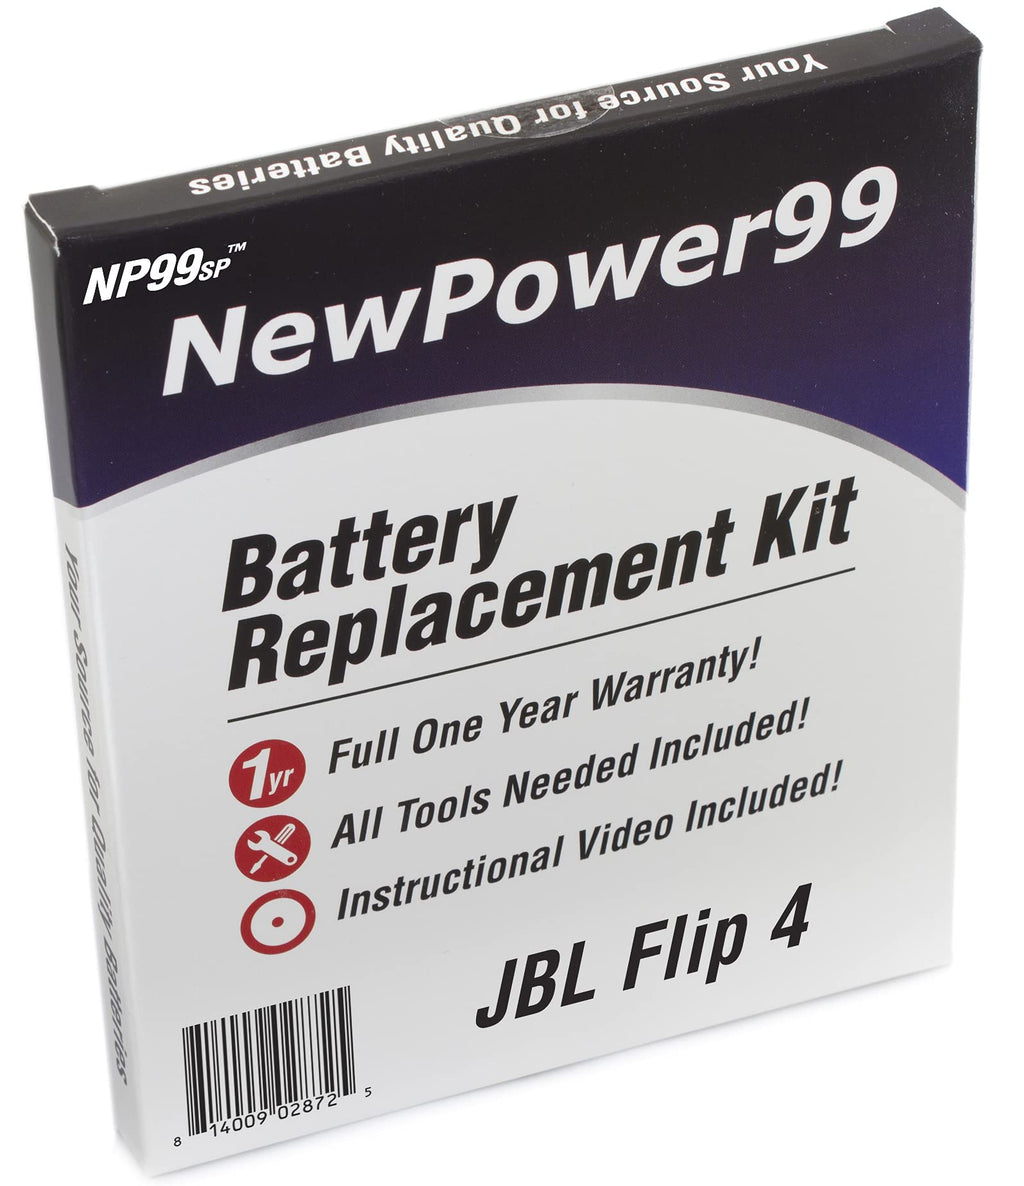 NP99sp NewPower99 Battery Kit for JBL Flip 4 Speaker with Tools, Video Instructions, Long Life Battery